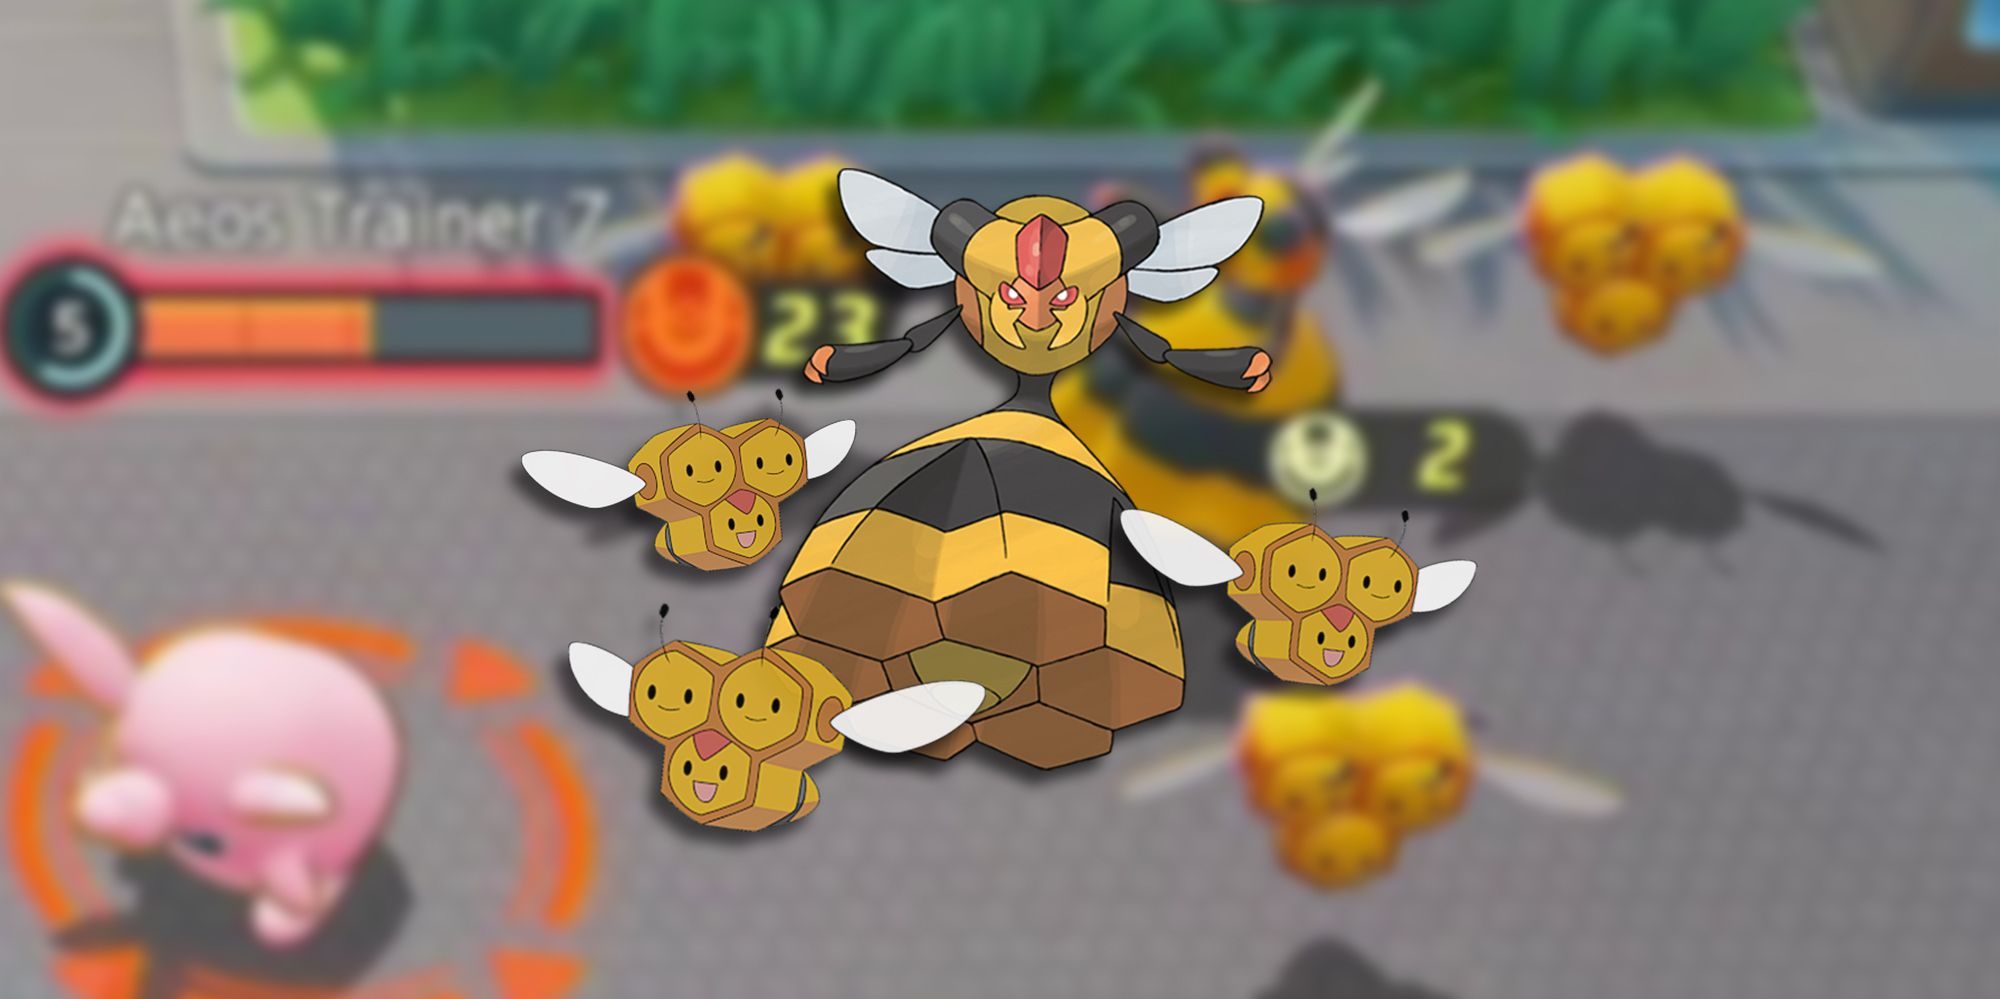 pokemon-unite-combee-and-vespiqueen-in-game-with-pngs-of-the-pokemon-overlaid-on-top-9686297